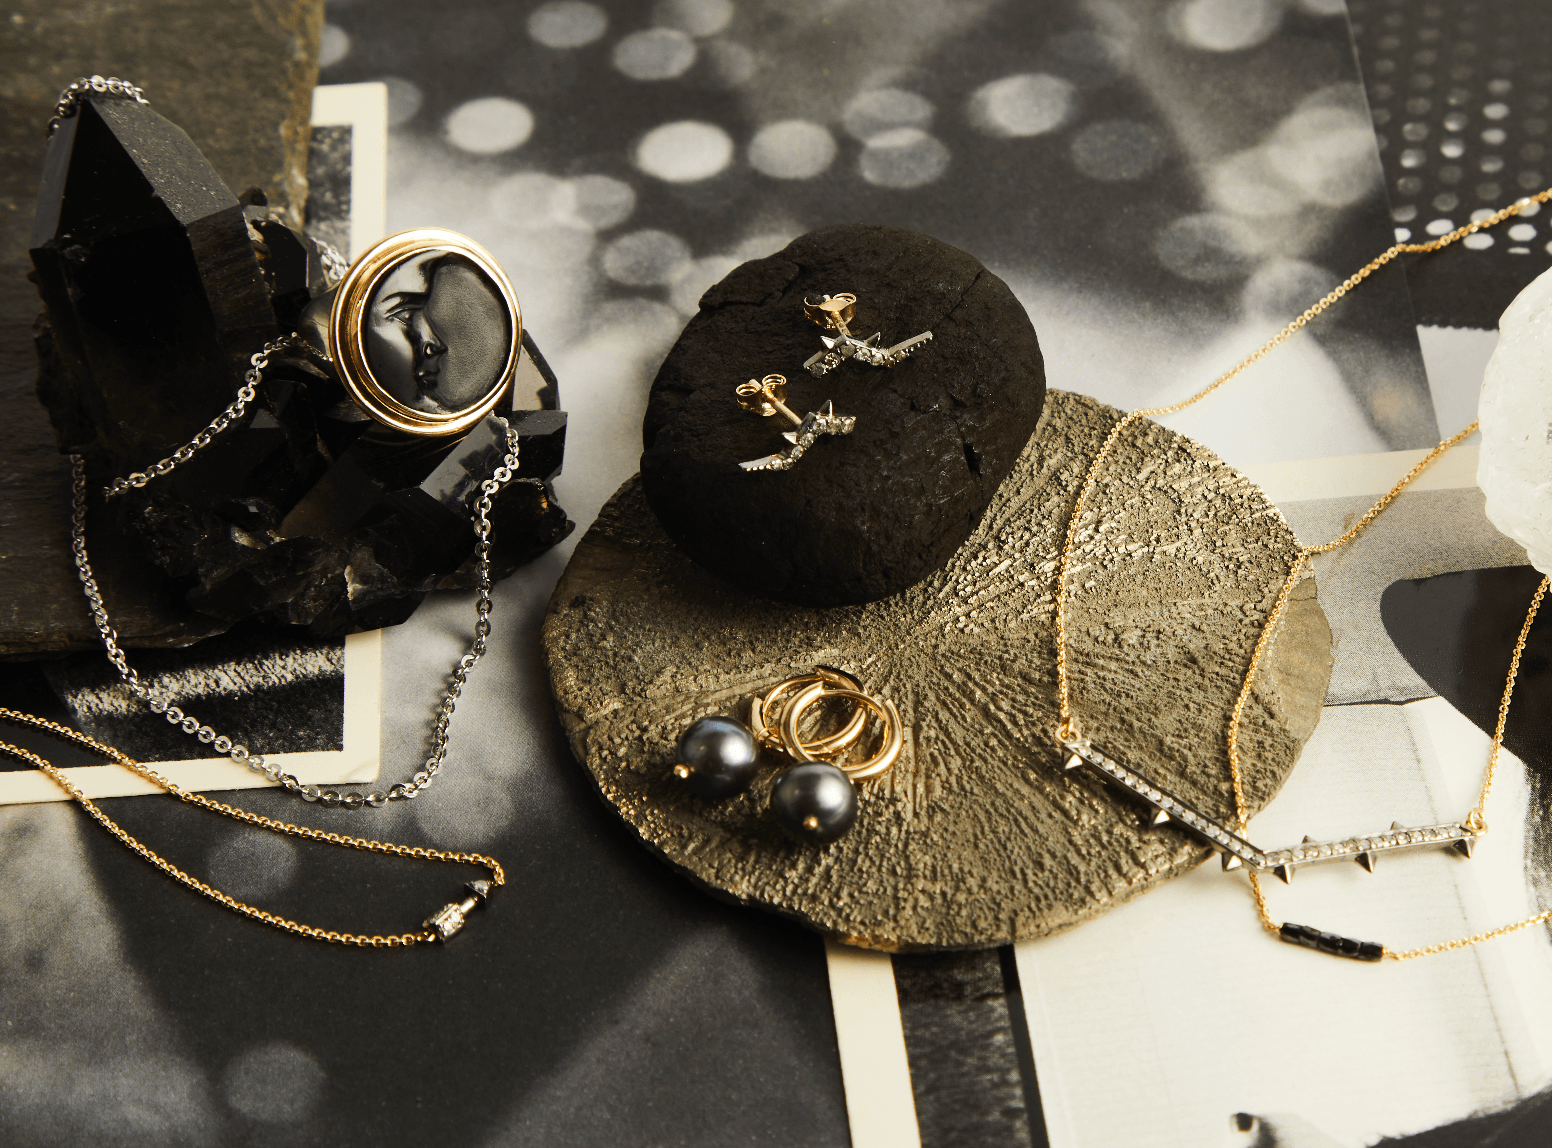 Discover our darkly romantic Paint It Black collection